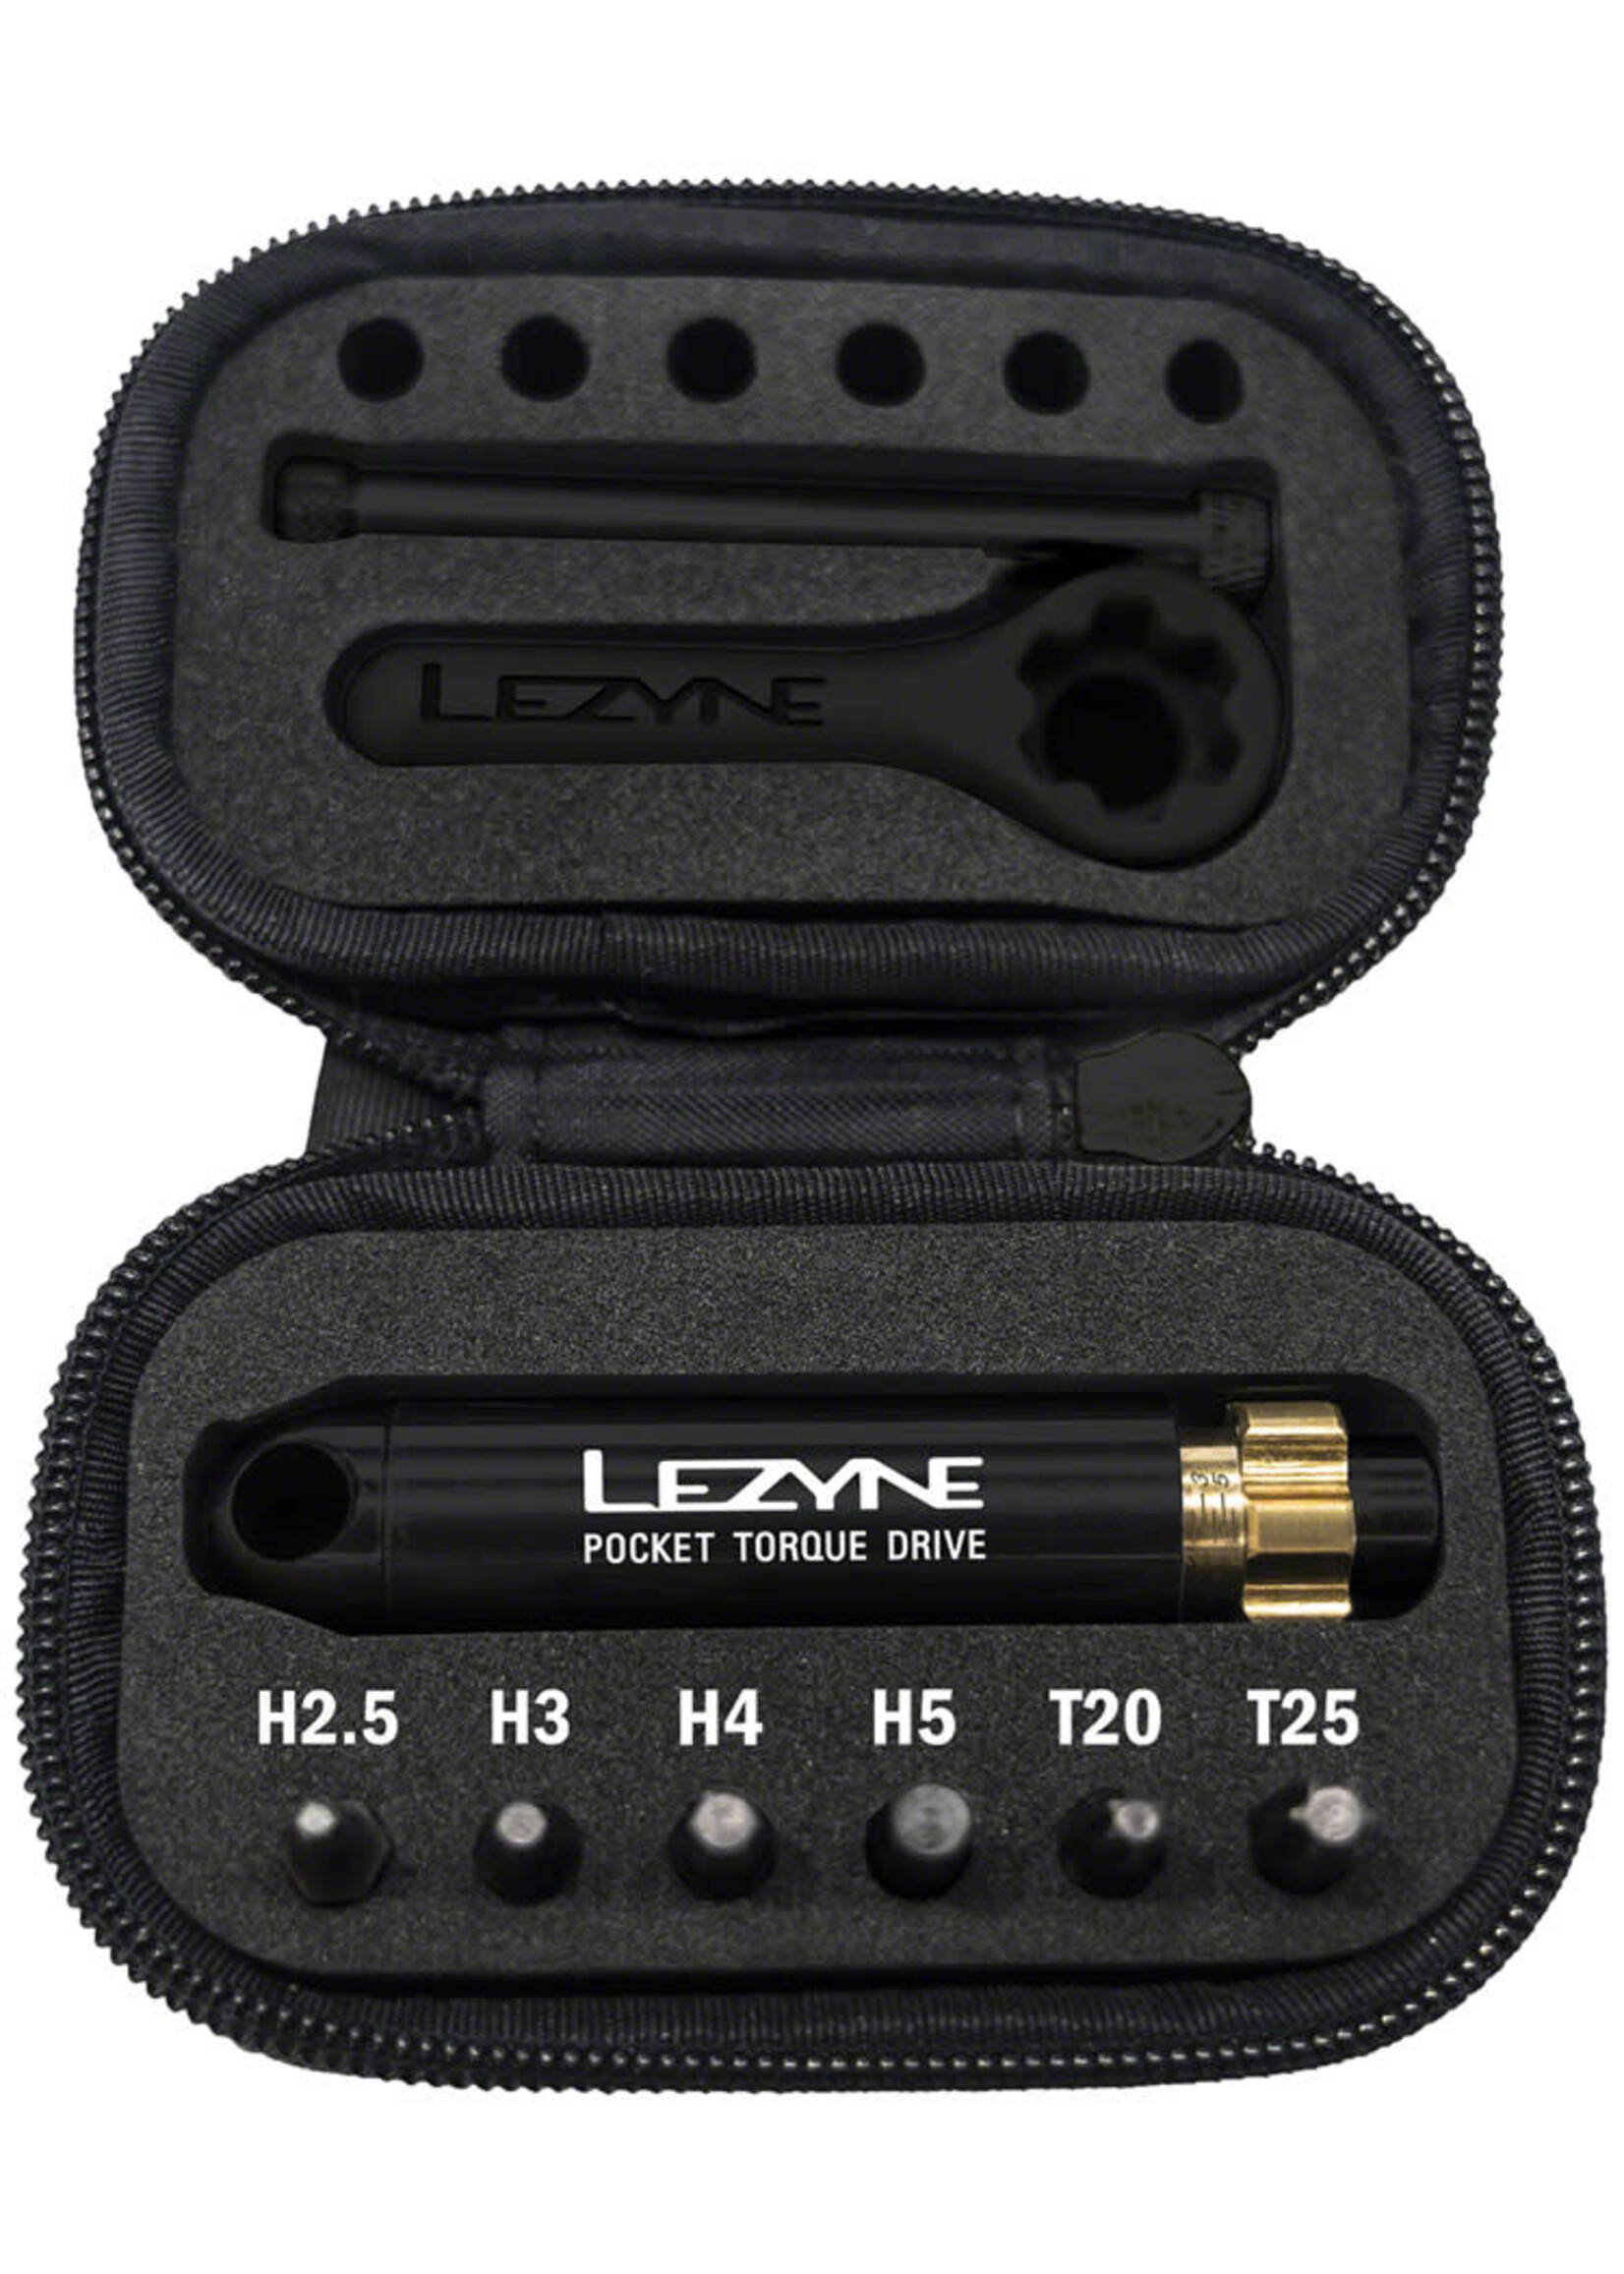 Lezyne Lezyne Pocket Torque Drive Torque Wrench - 2-6 Nm, 2.5, 3, 4, 5MM, T20, AND T25 BITS, With Storage Case, Black